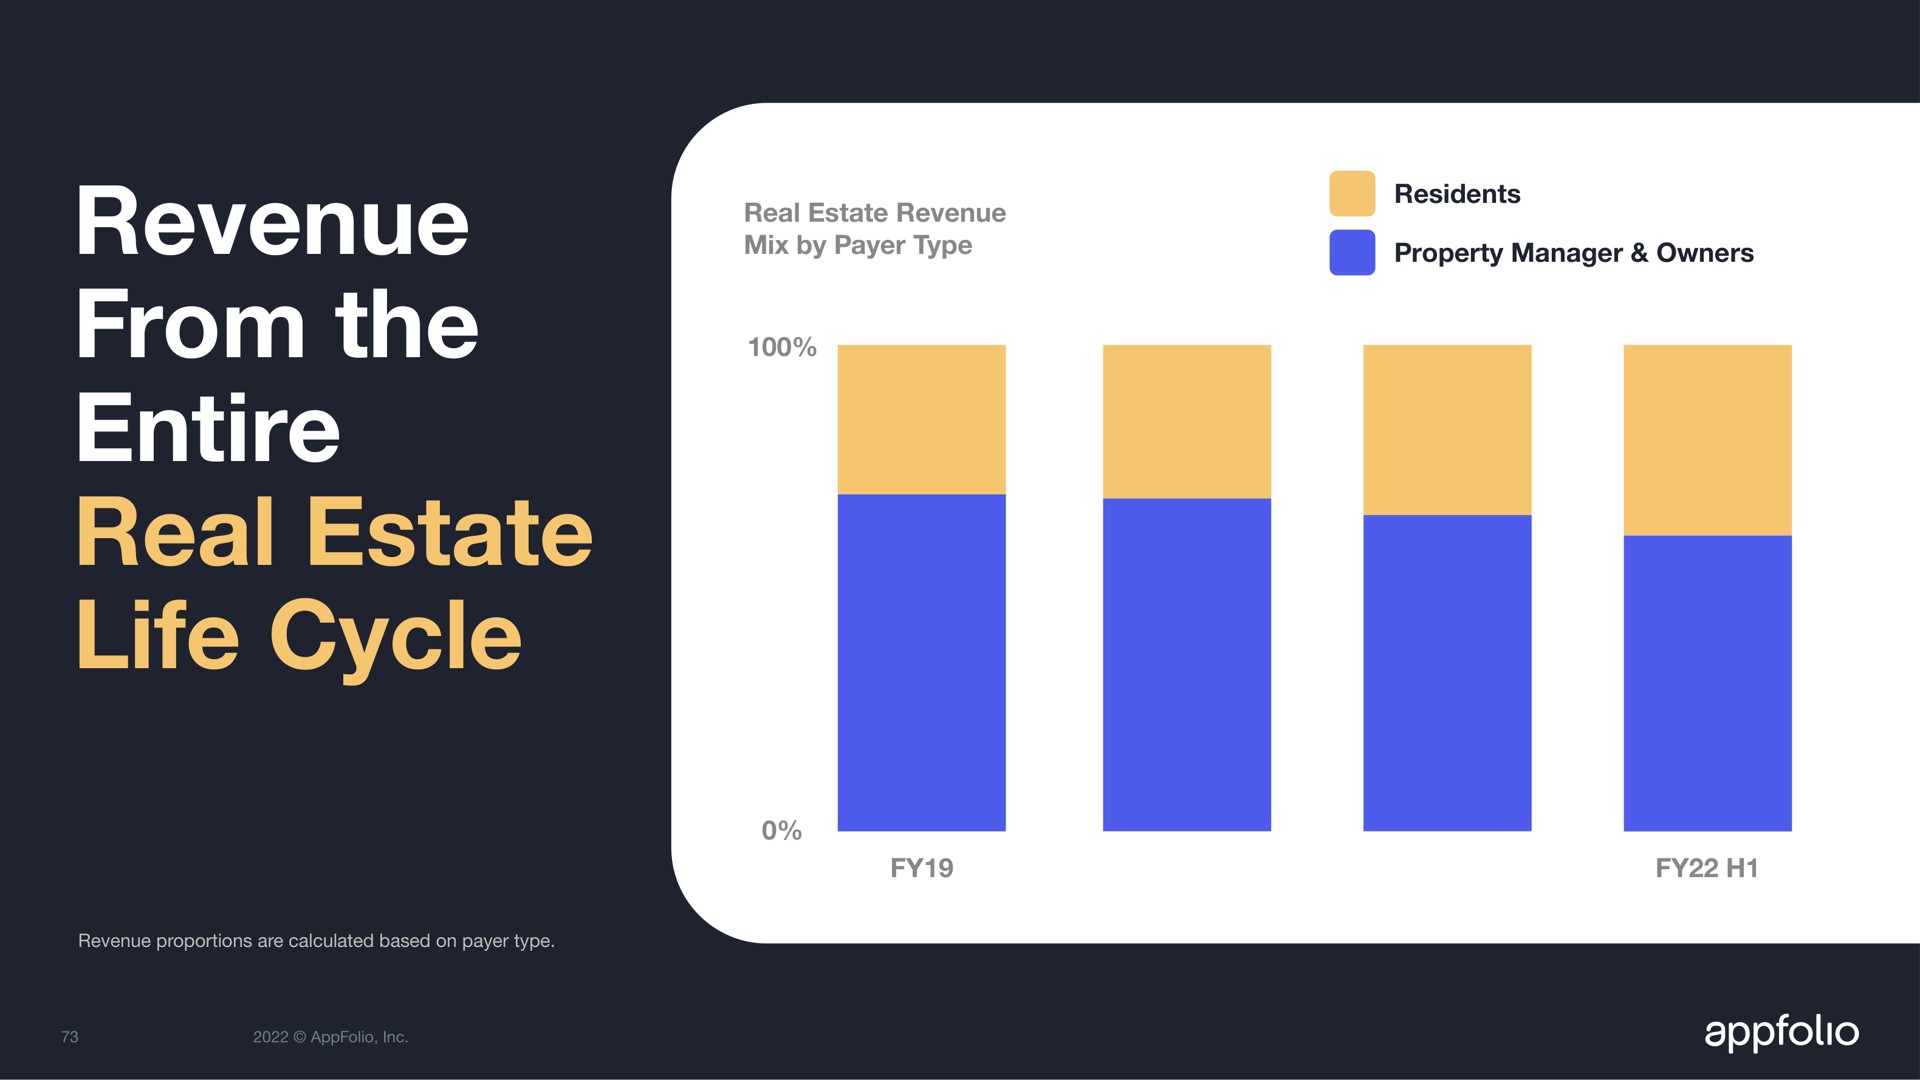 revenue from the entire real estate life cycle manager owners | AppFolio